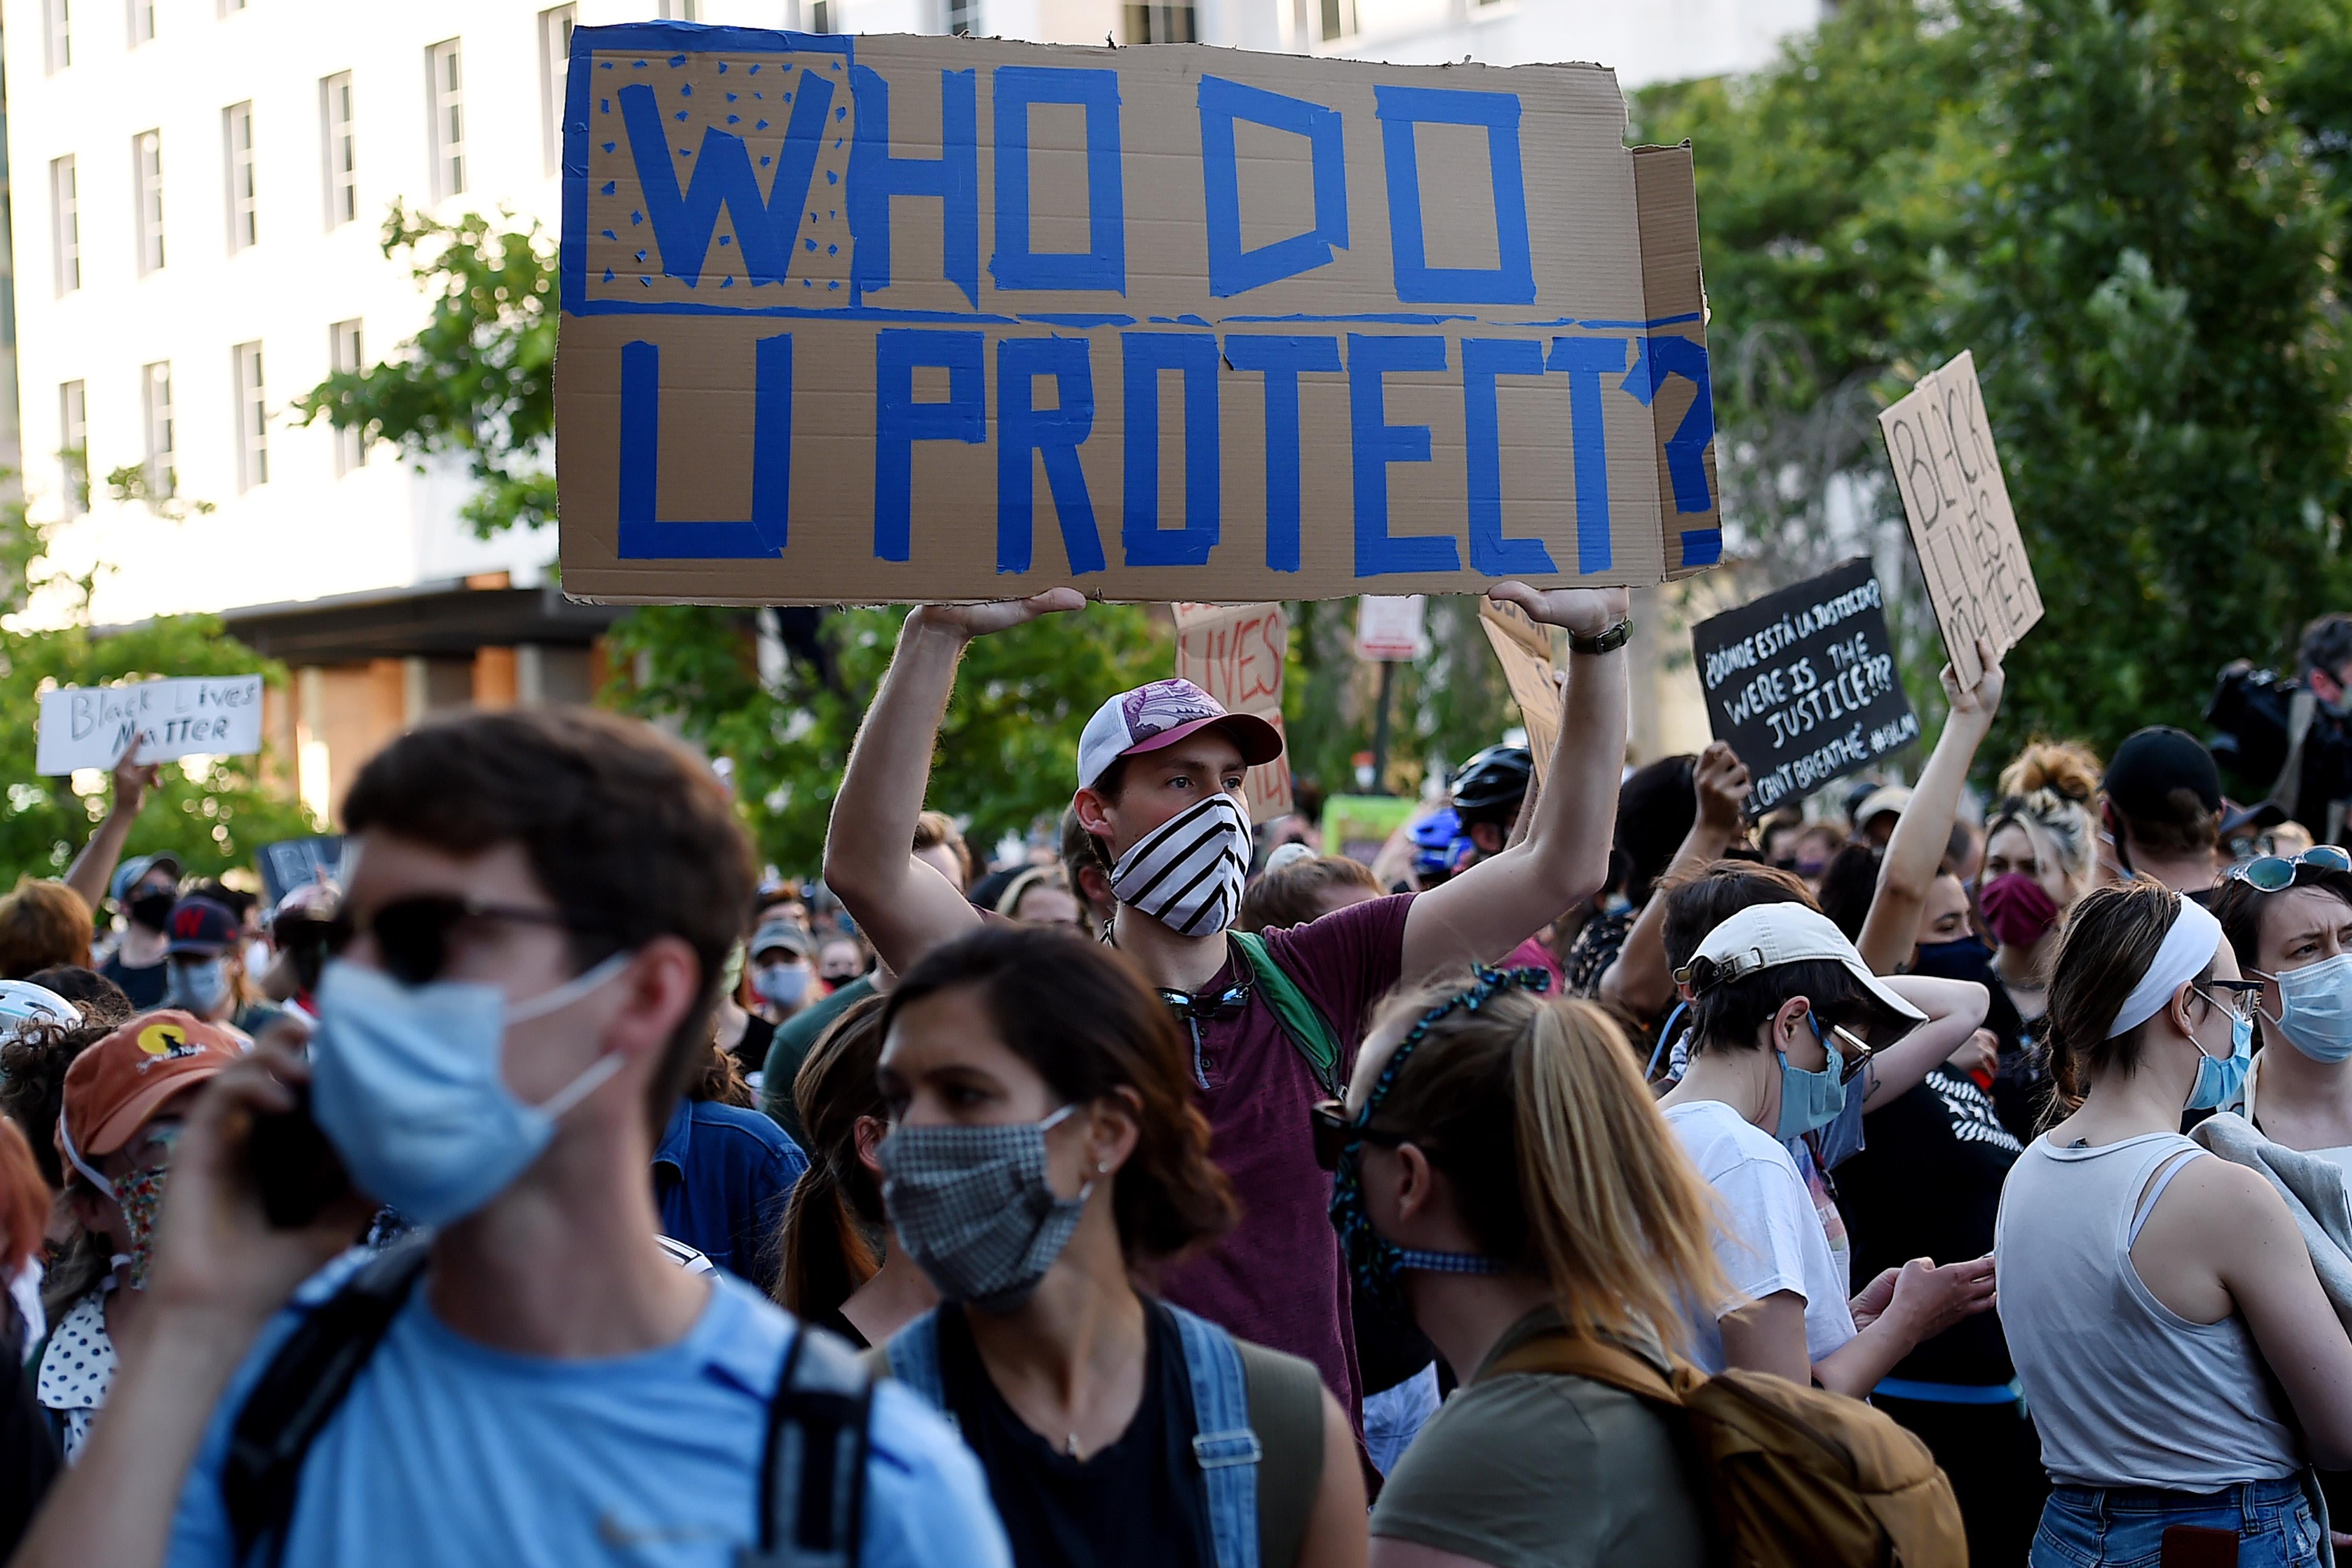 Amid a group of protesters wearing masks, a man holds a sign that says "Who Do U Protect?"